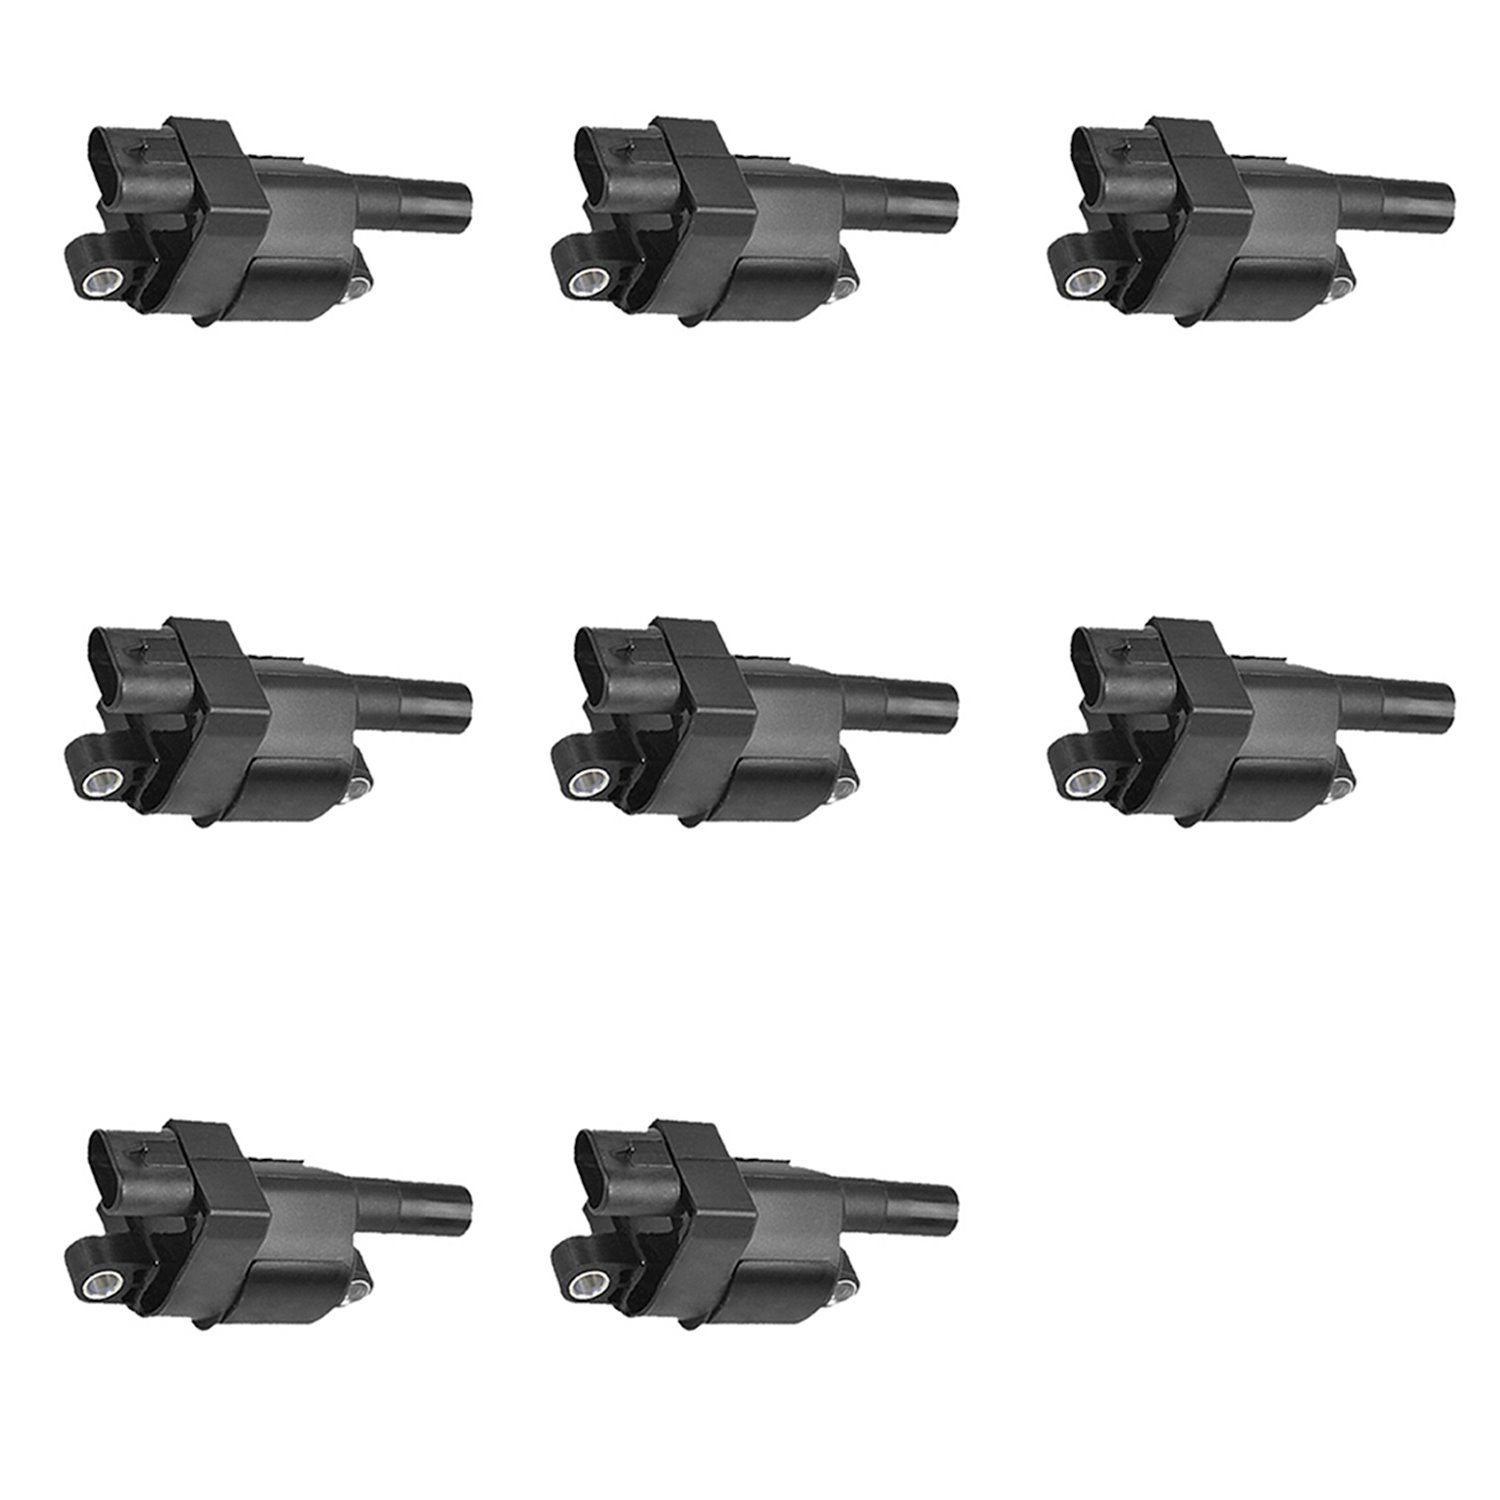 OE Replacement Ignition Coils for GM 6.0L/5.3L